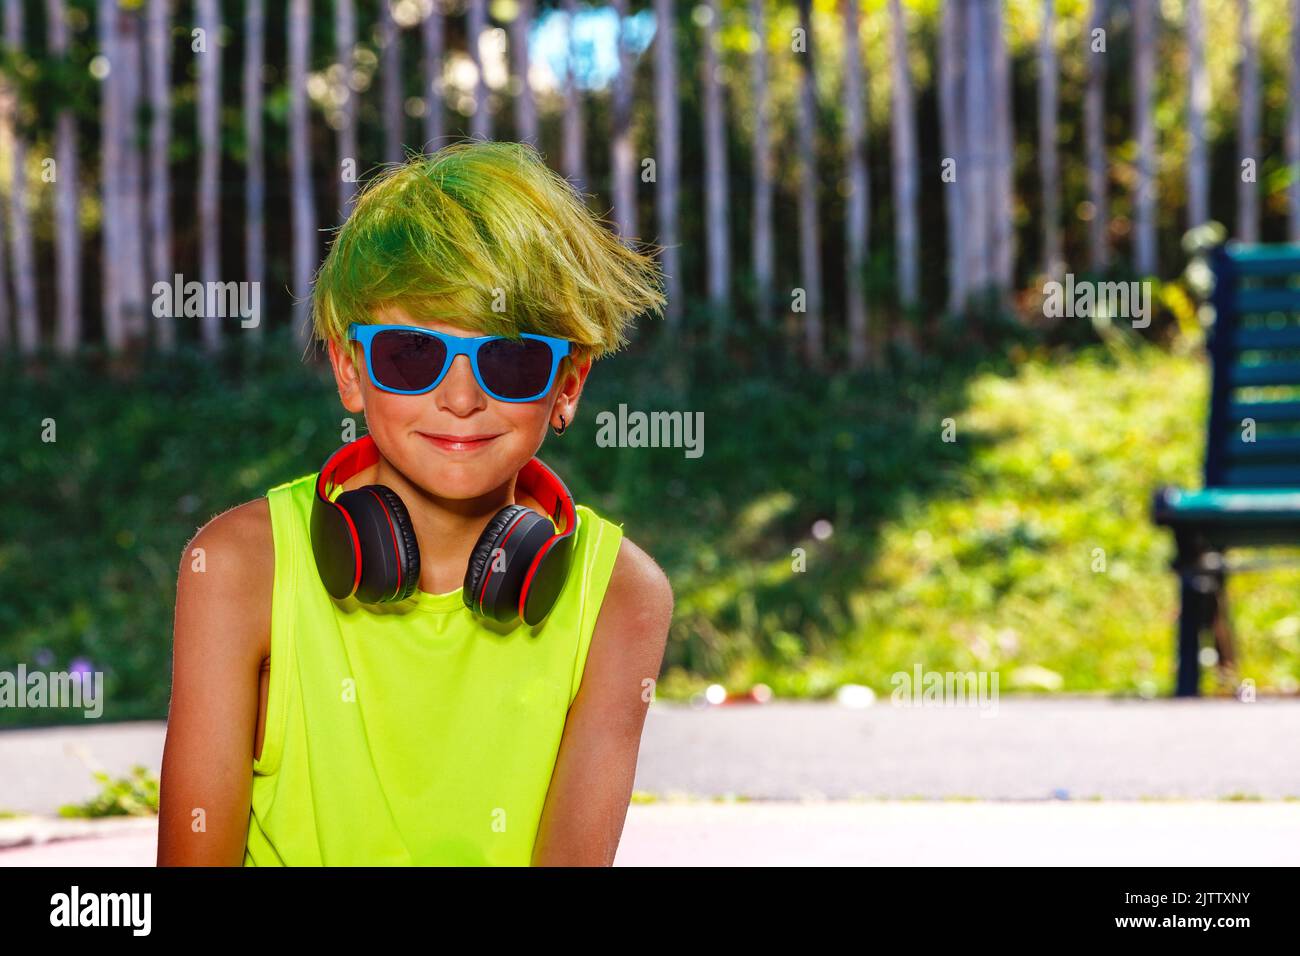 Young preteen boy with green hair headphones and shades at park Stock Photo